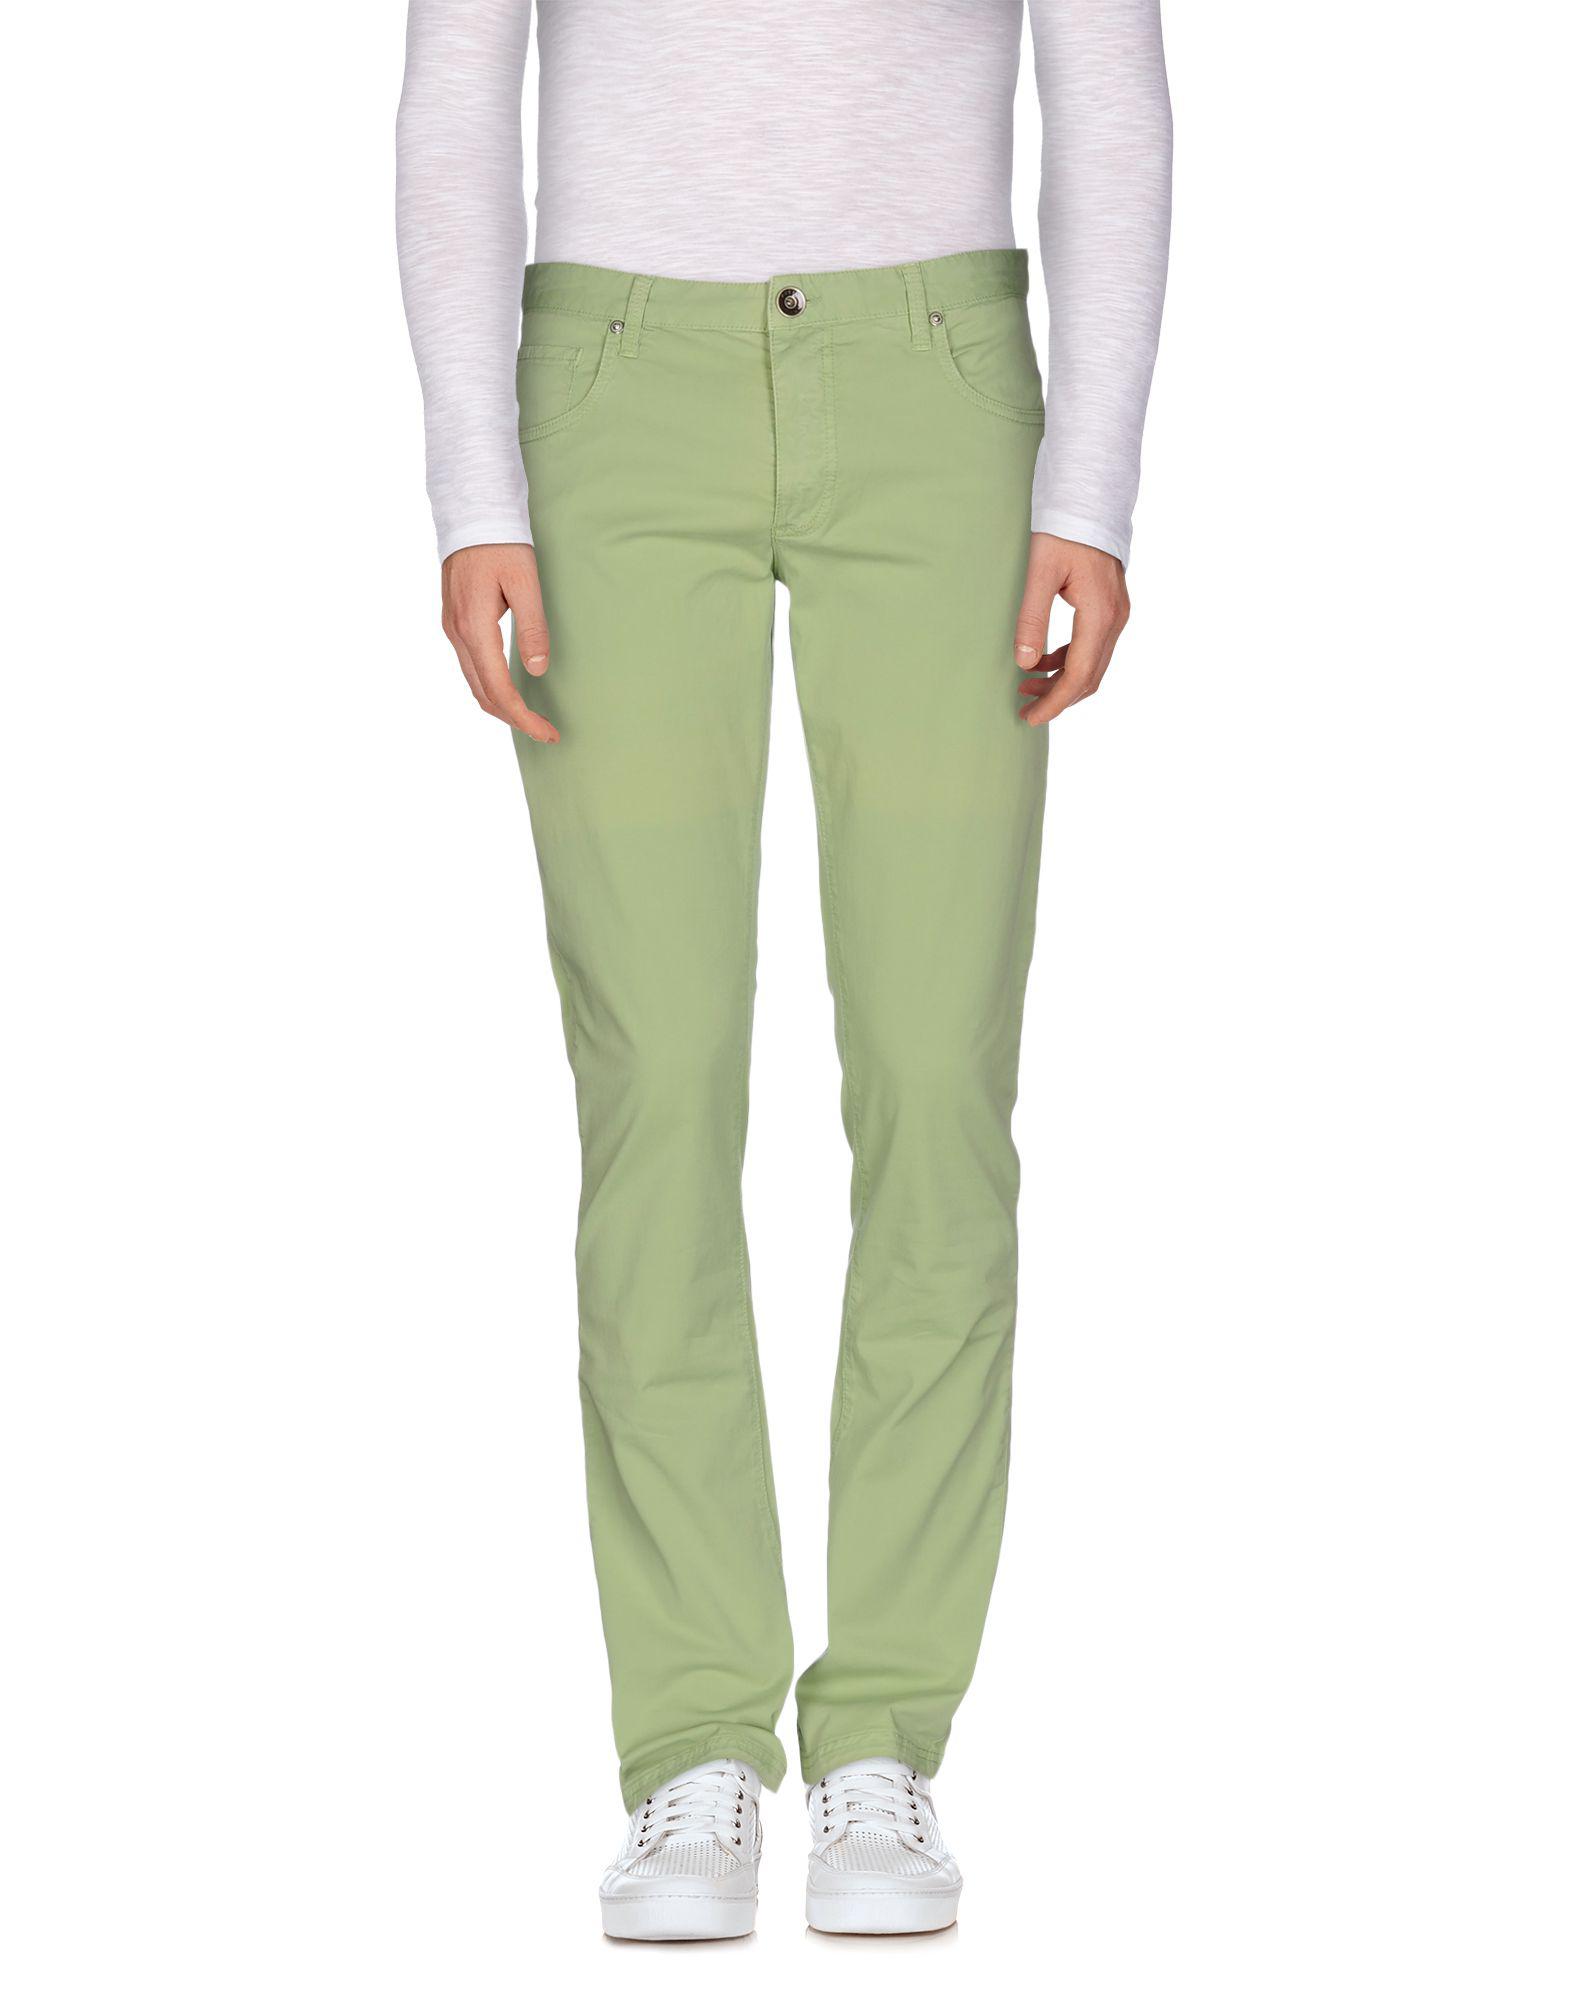 Guess Cotton Casual Pants in Light Green (Green) for Men - Lyst